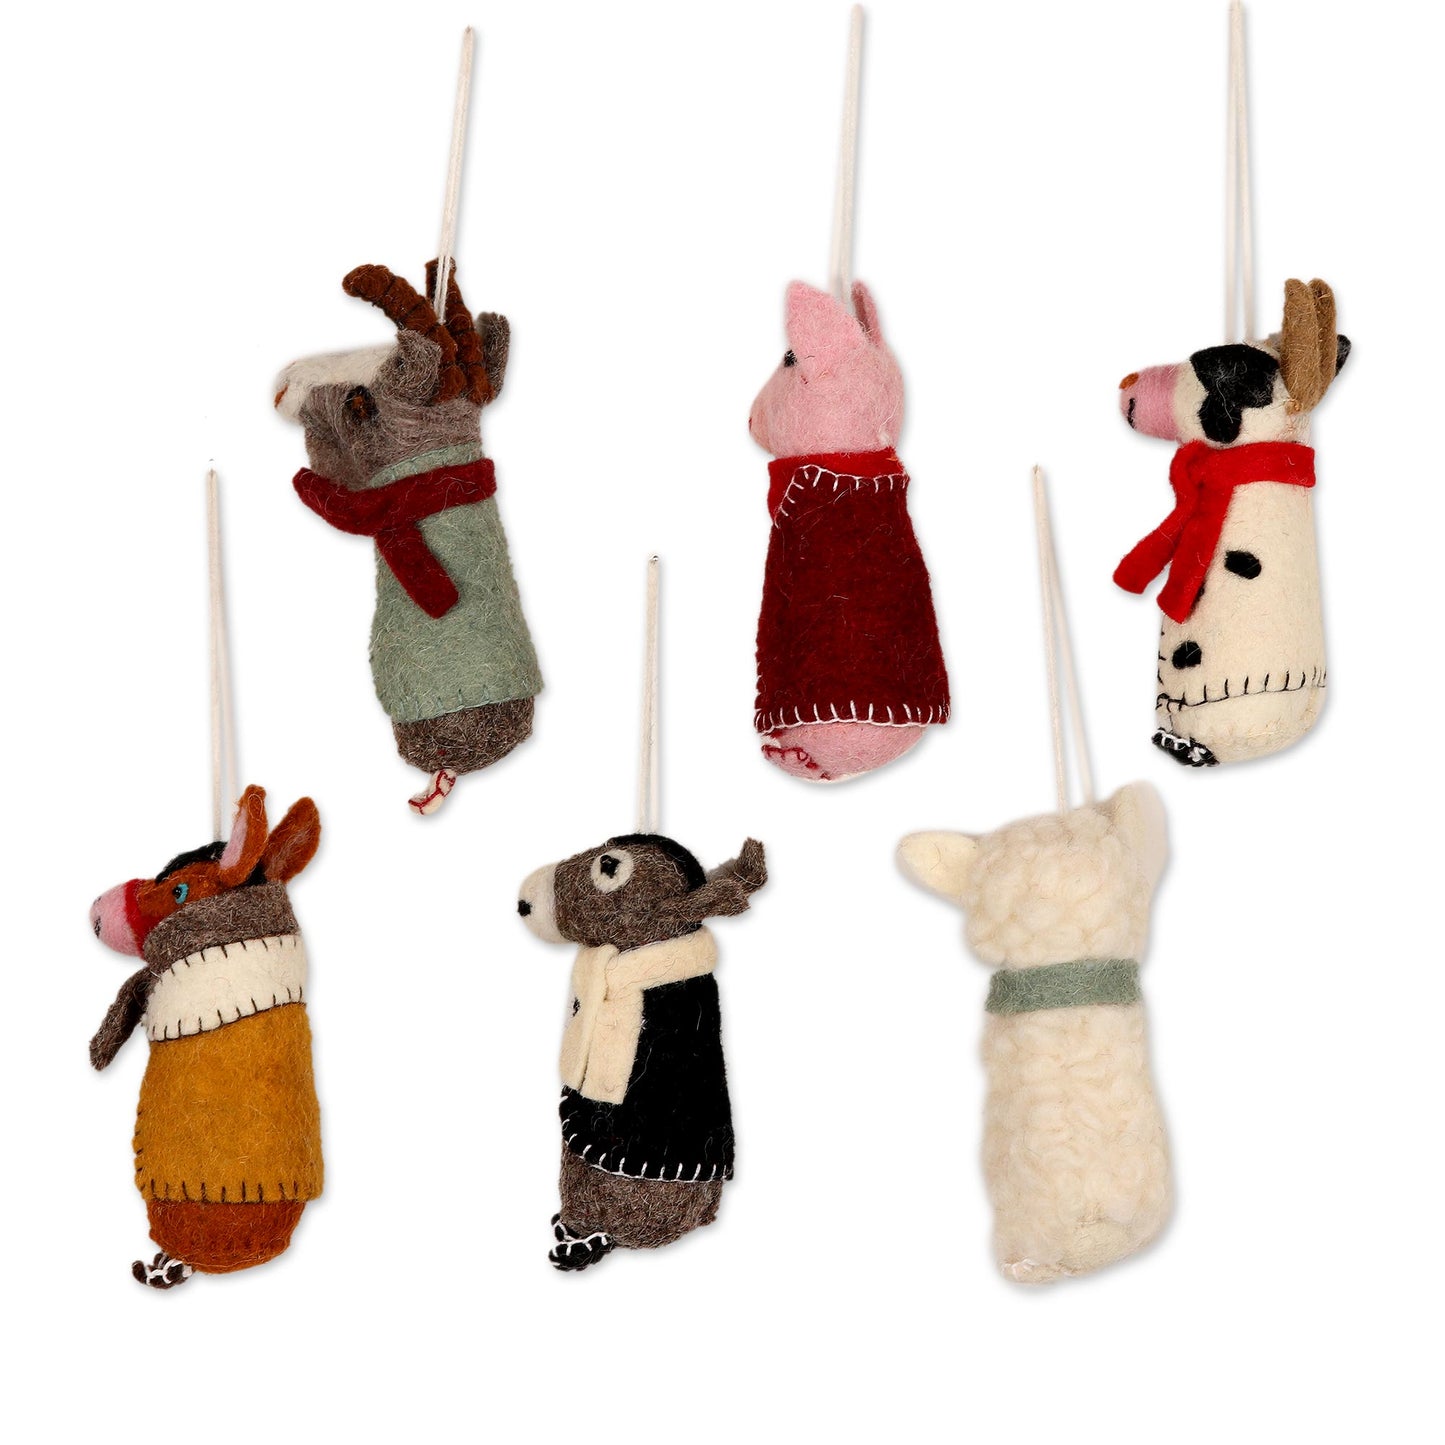 Barnyard Bunch Embroidered Wool Animal Holiday Ornaments (Set of 6)